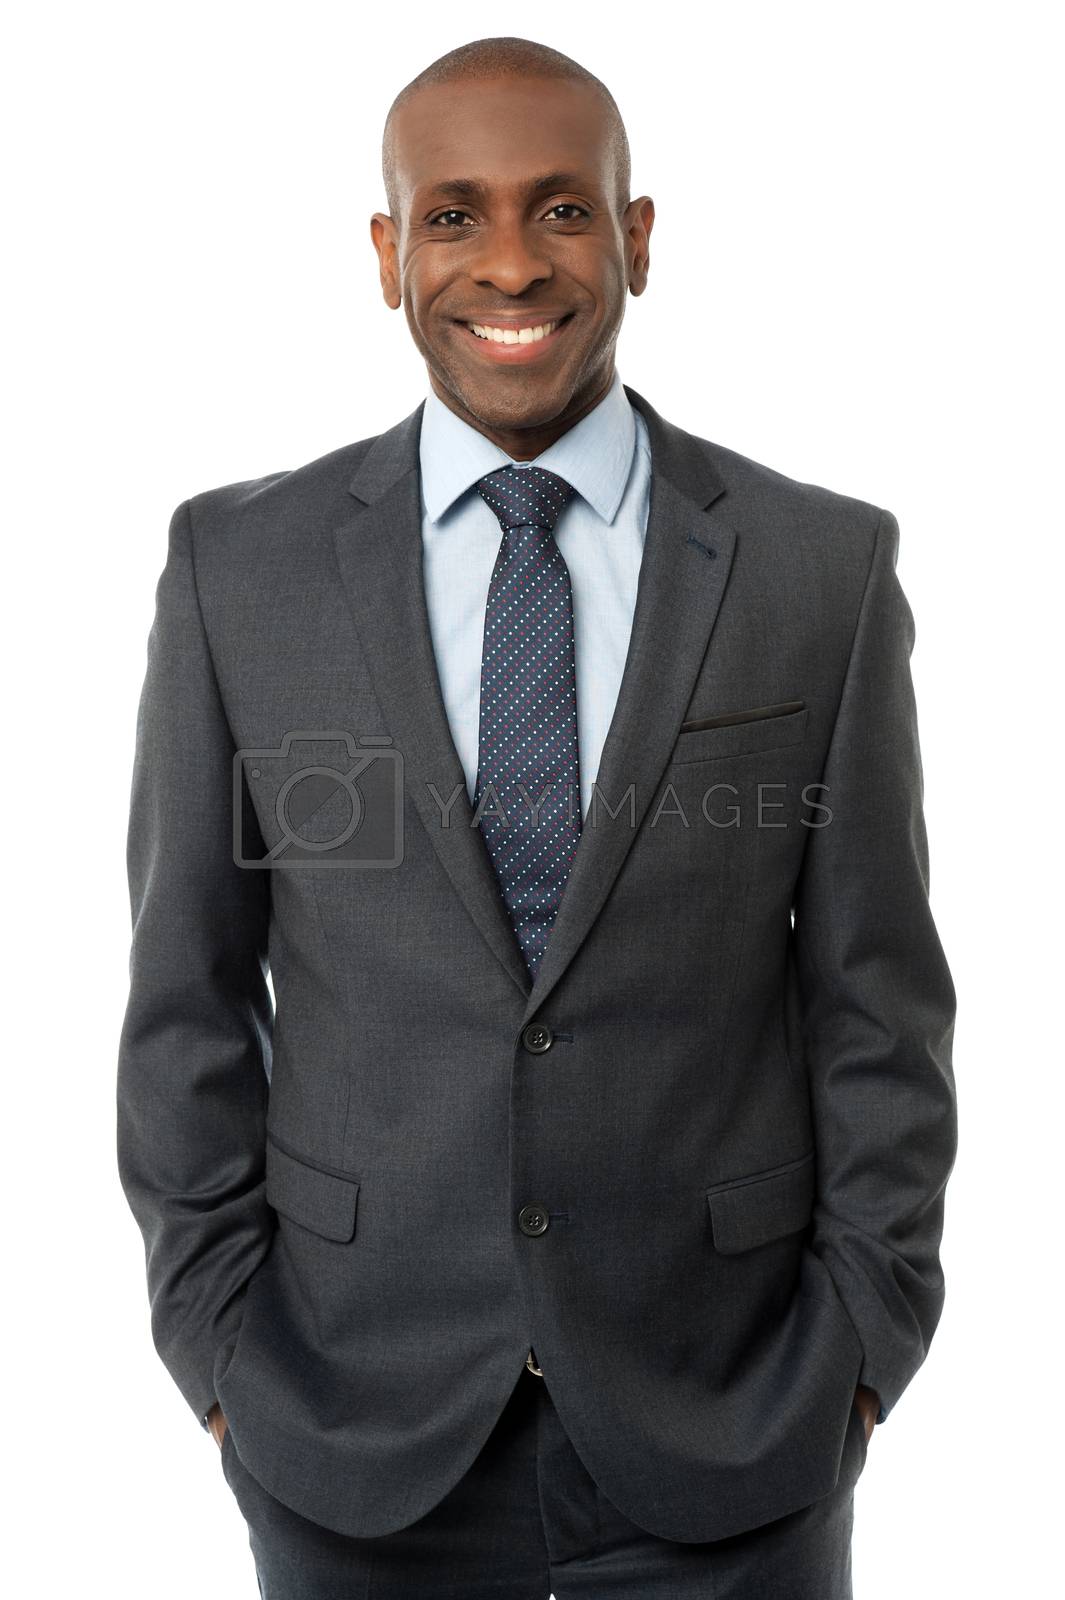 Royalty free image of Confident businessman posing by stockyimages